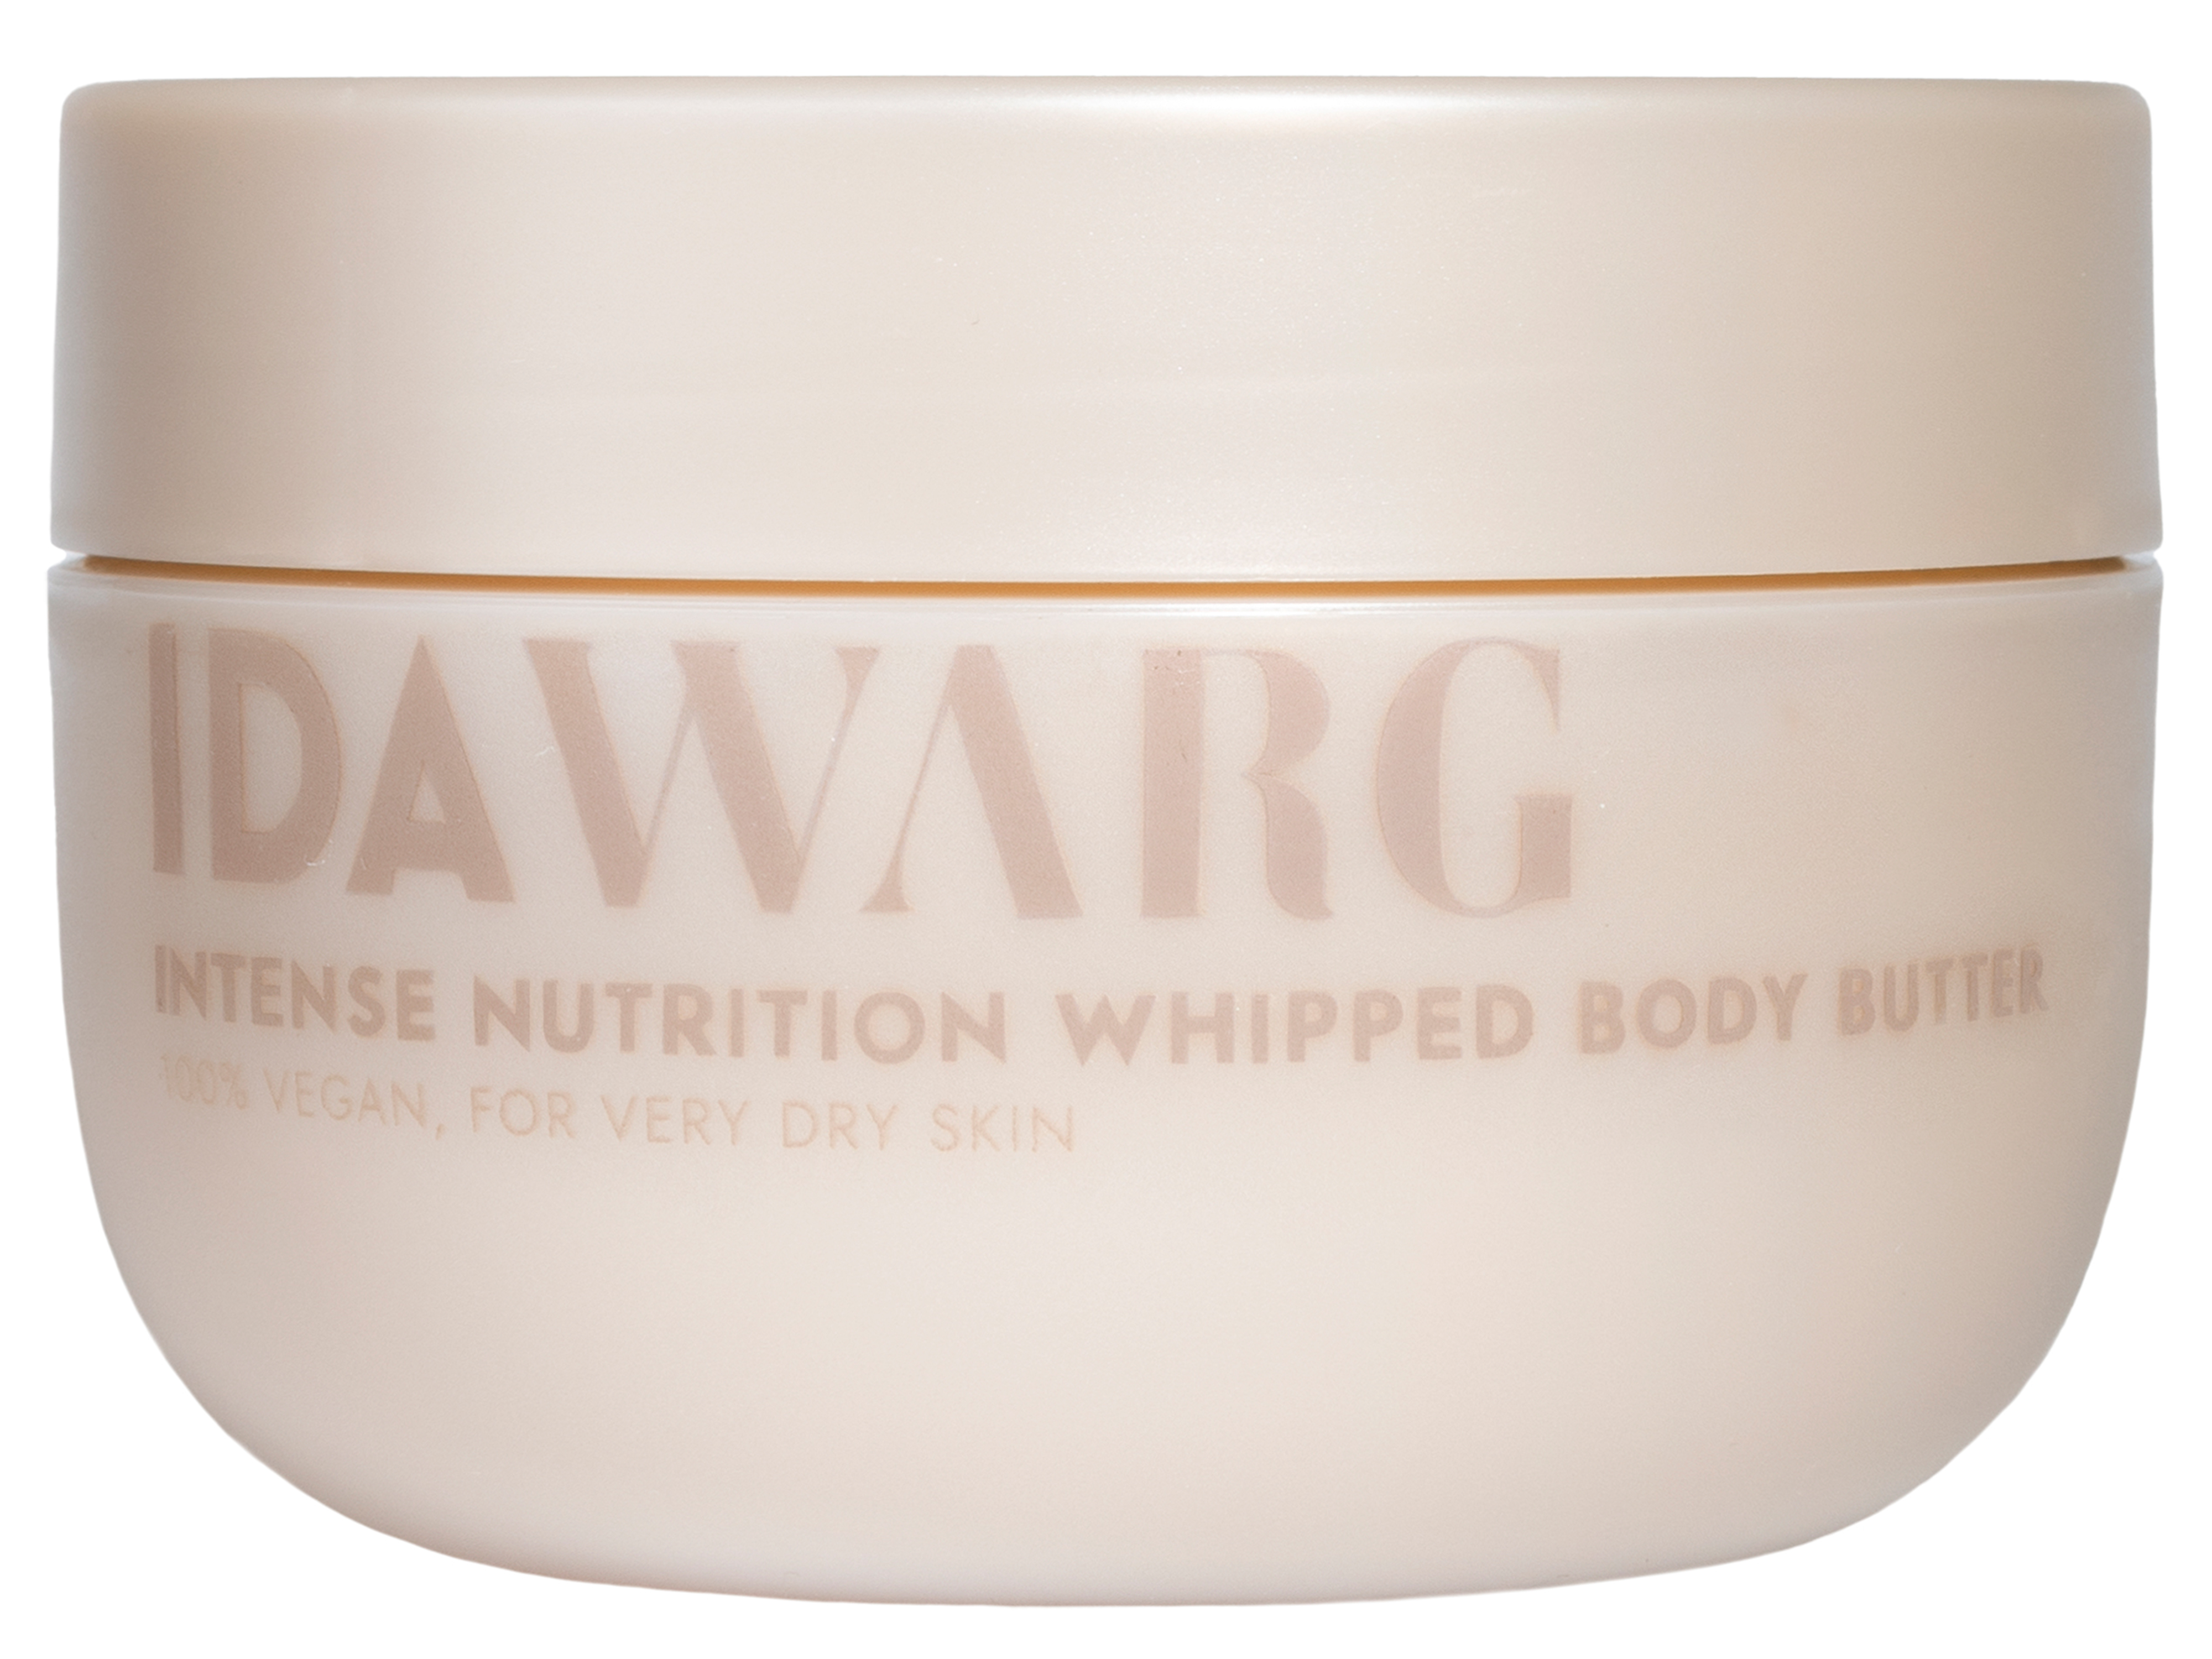 Intense Nutrition Whipped Body Butter, 250 ml